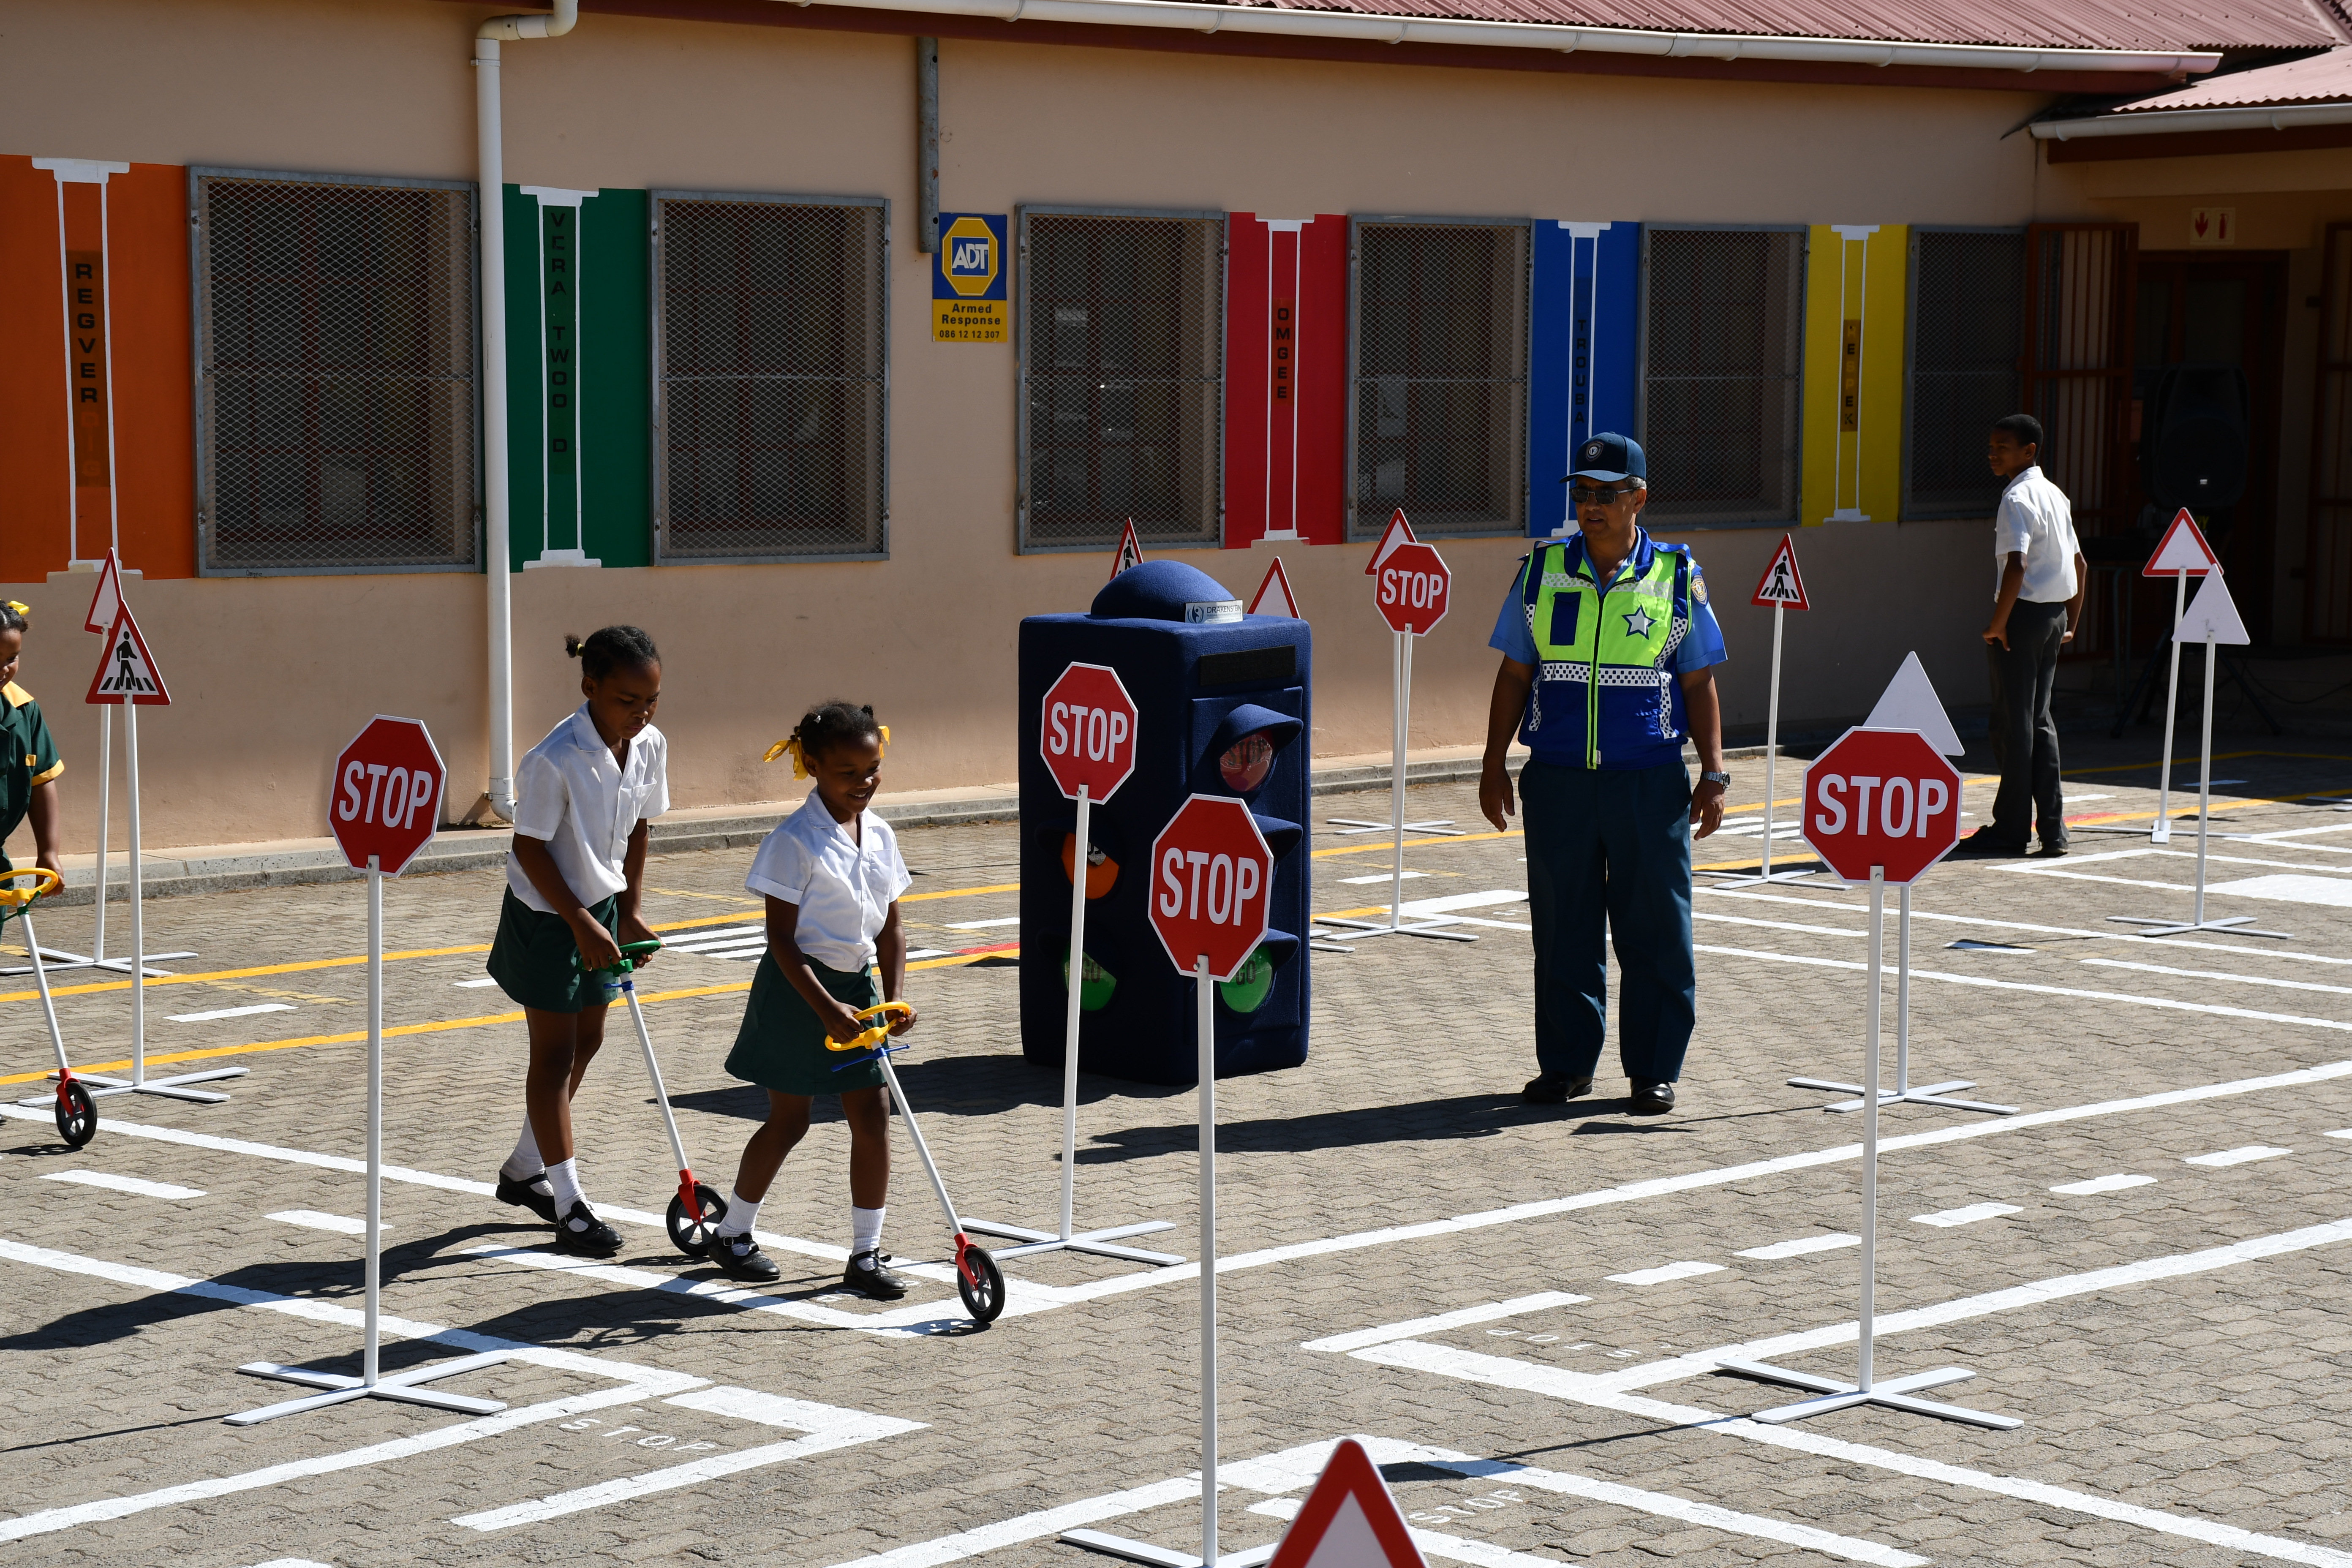 Grade 3 learners at the Simondium Primary School taking part in a road safety education demonstration at the opening of the Junior Traffic Training Centre (JTTC) at the school.